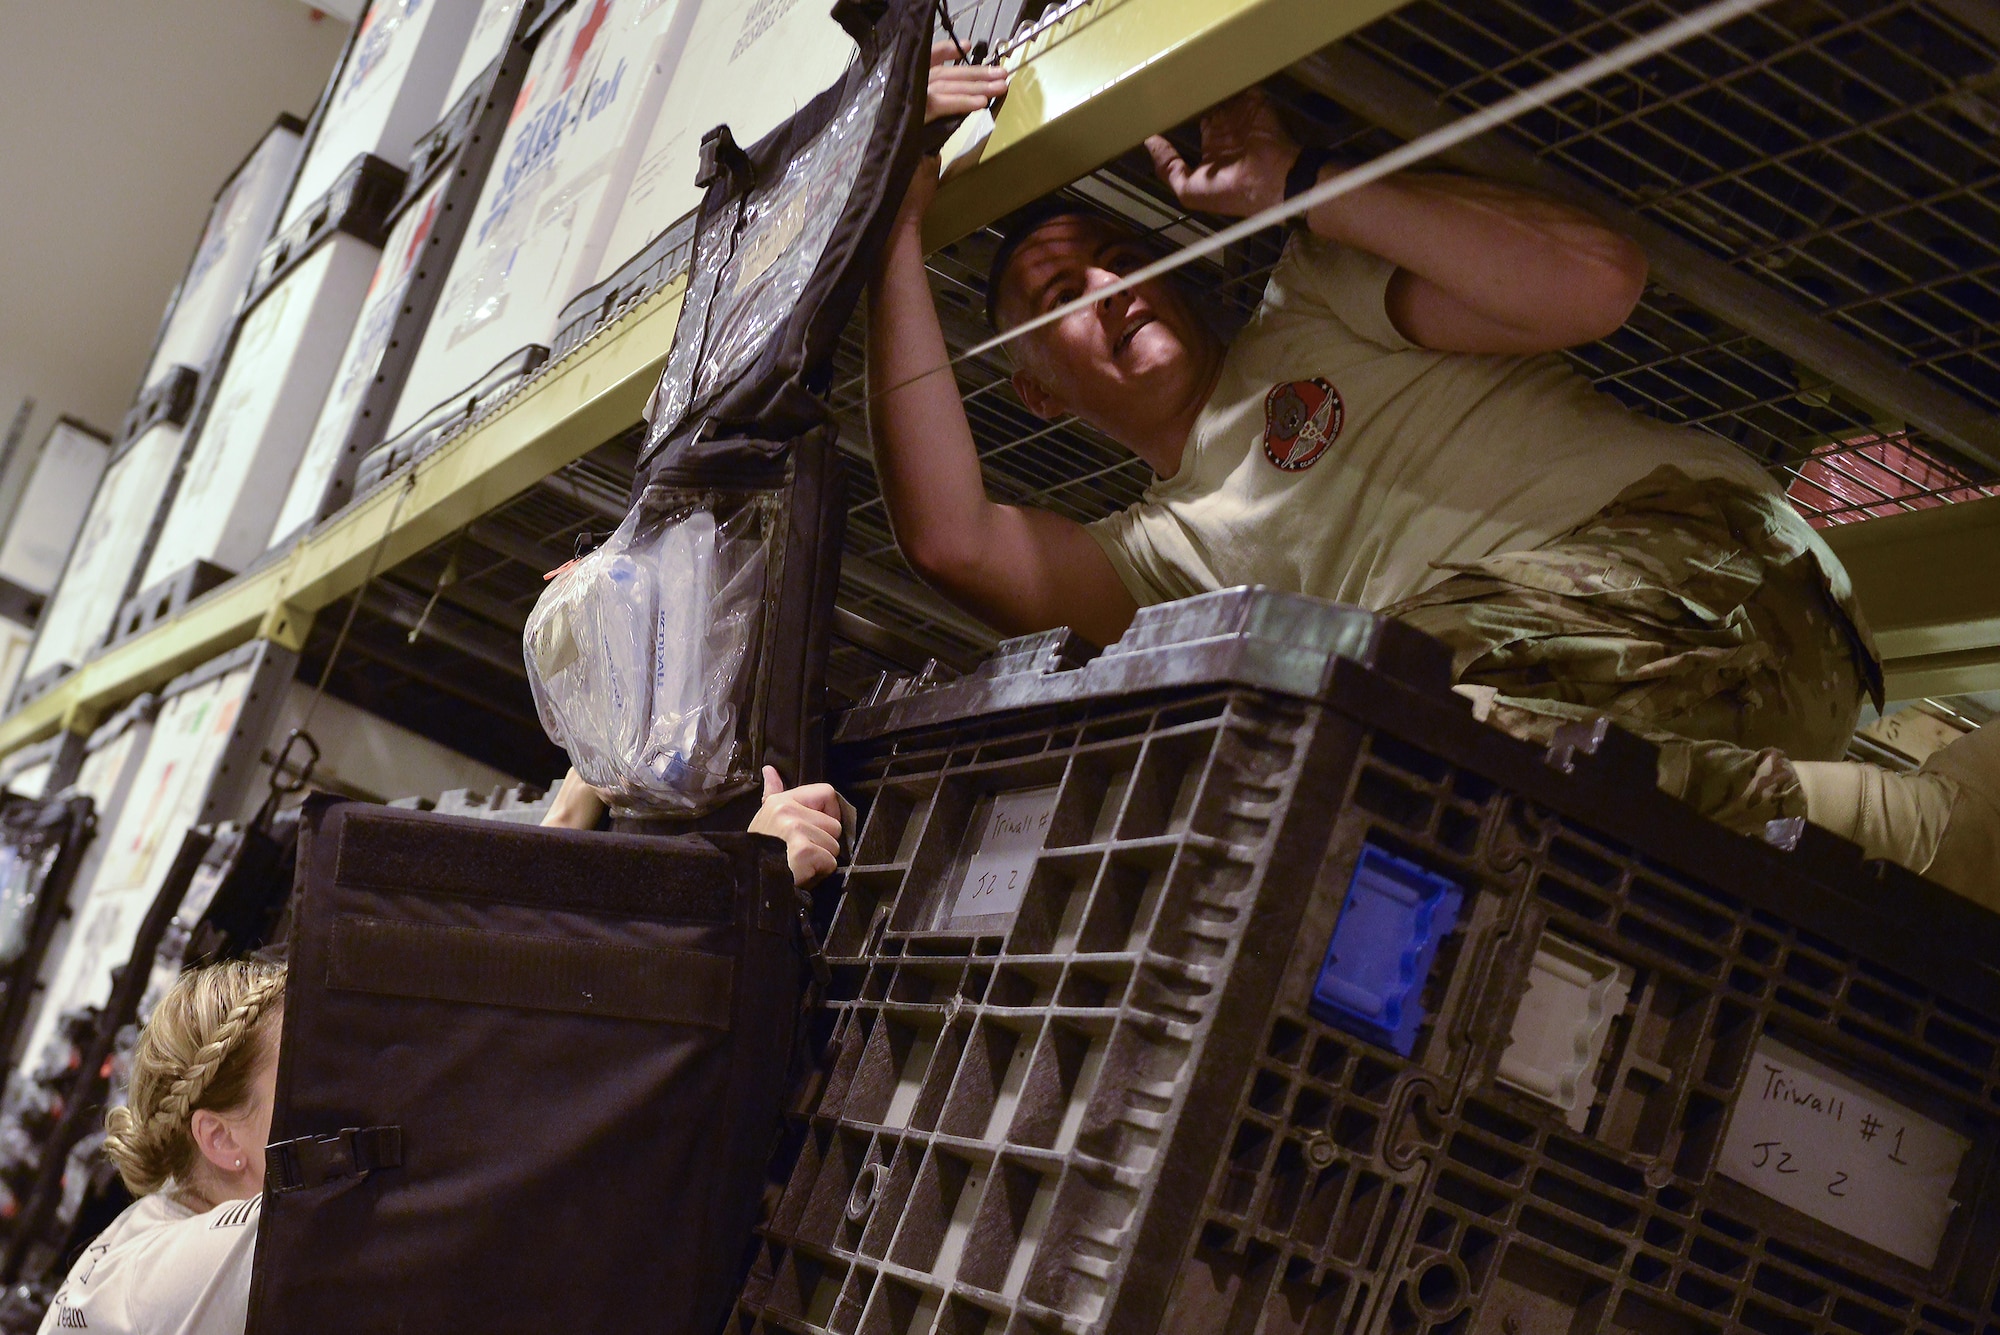 Capt. Suzanne Bohn and Staff Sgt. Cody Rothlisberger, 379th Expeditionary Medical Group Mobile Field Surgical Team, hang and secure their mobile Intensive Care supplies as they are timed during a setup and equipment familiarization training August 28, 2015 at Al Udeid Air Base, Qatar. (U.S. Air Force photo/Staff Sgt. Alexandre Montes)